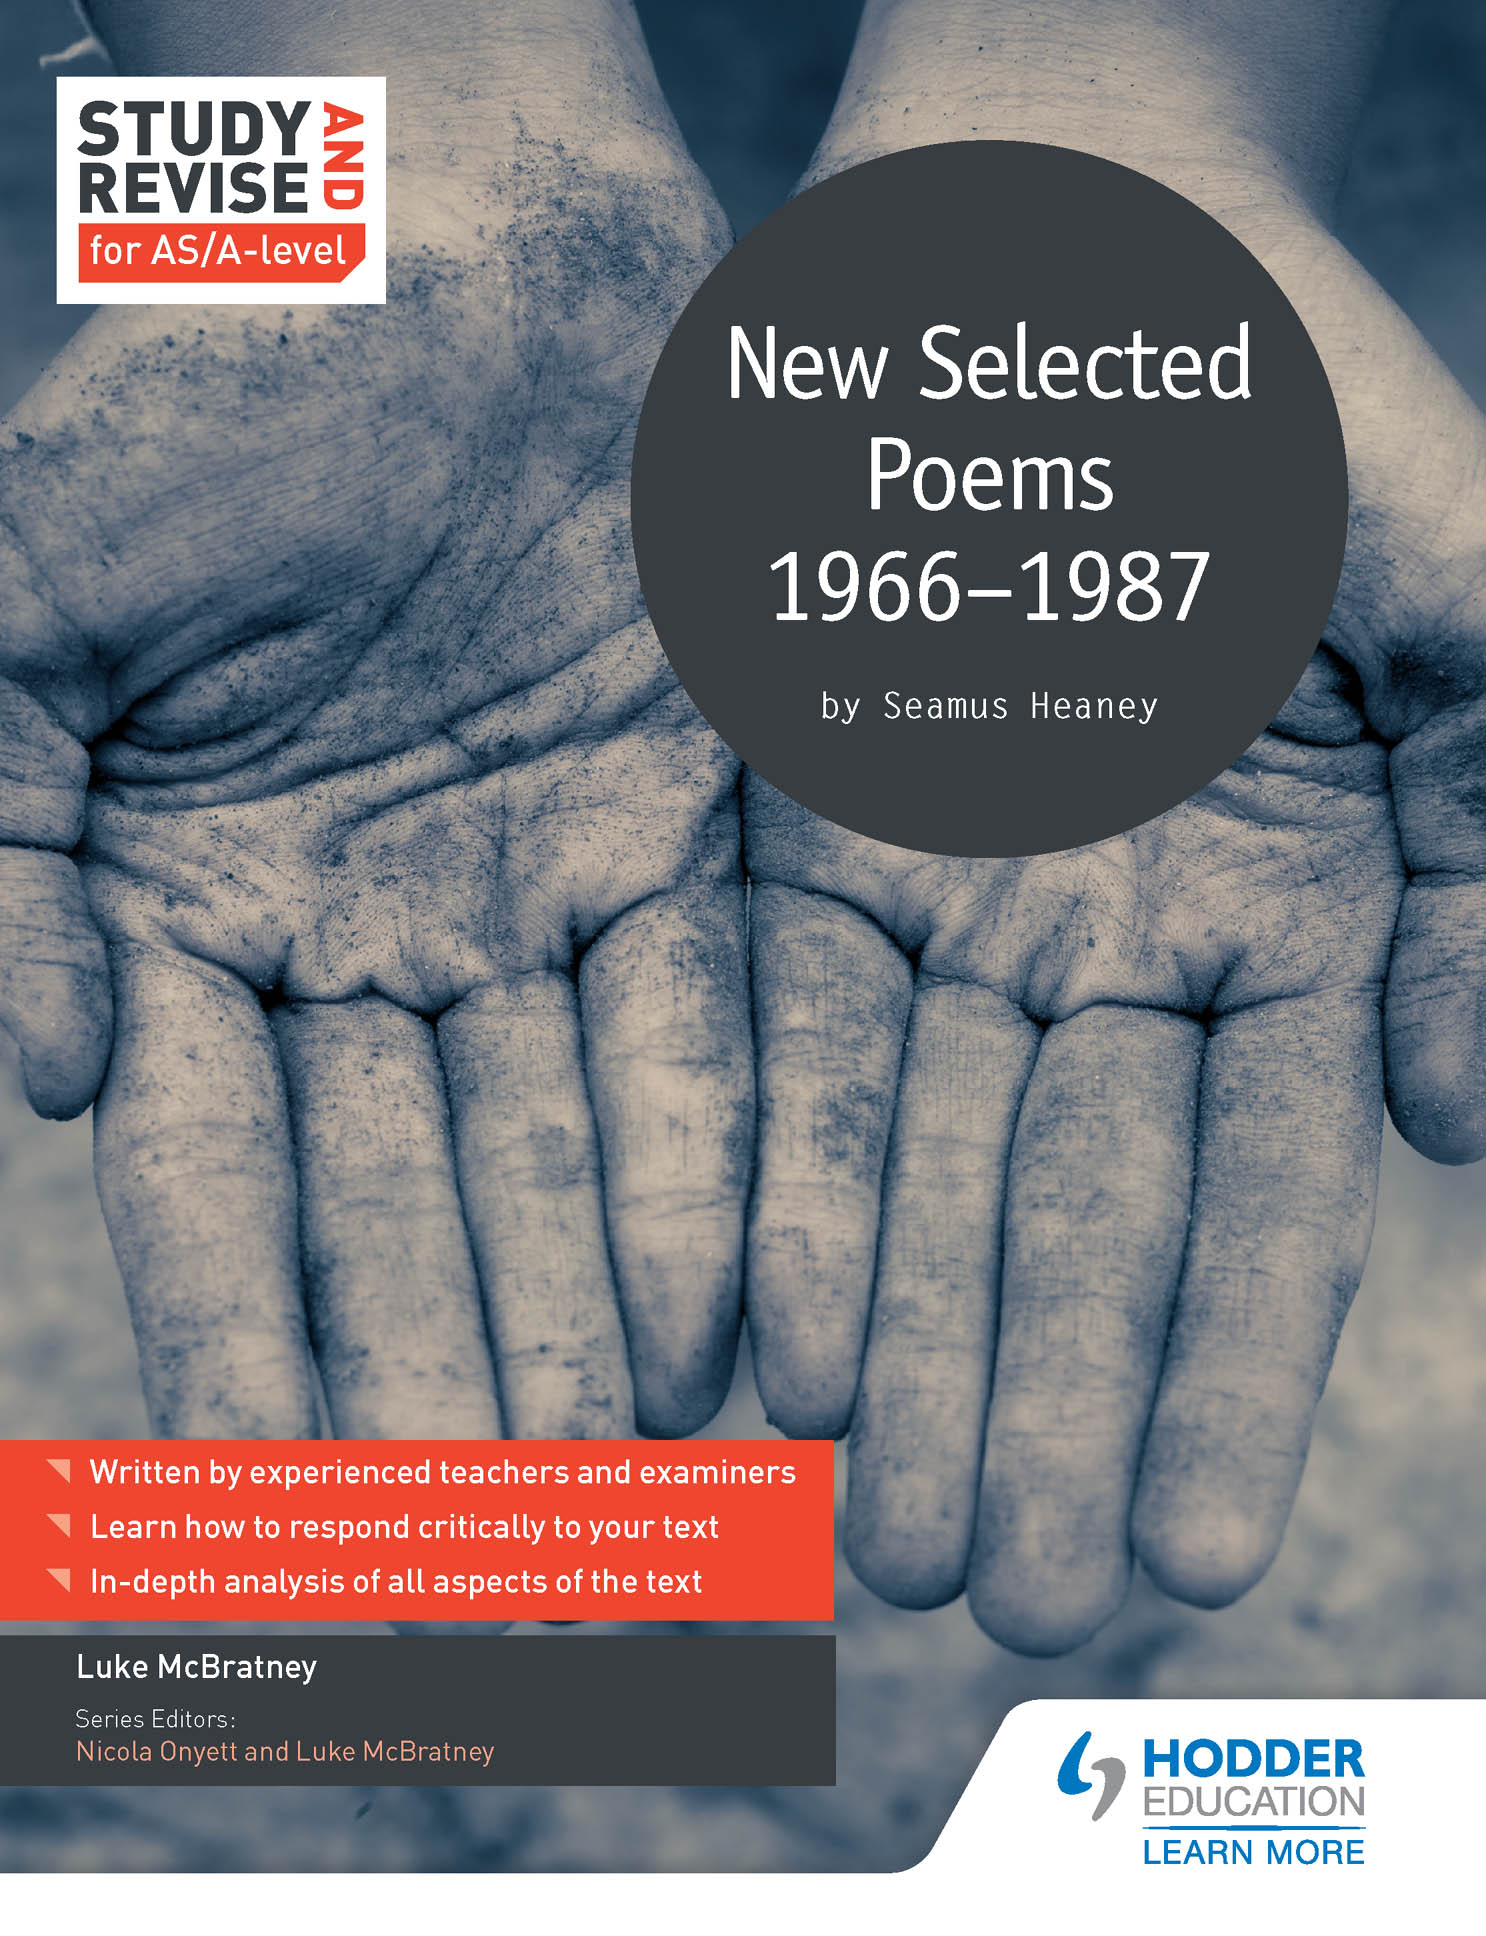 Study and Revise for AS/A-level: Seamus Heaney: New Selected Poems, 1966-1987